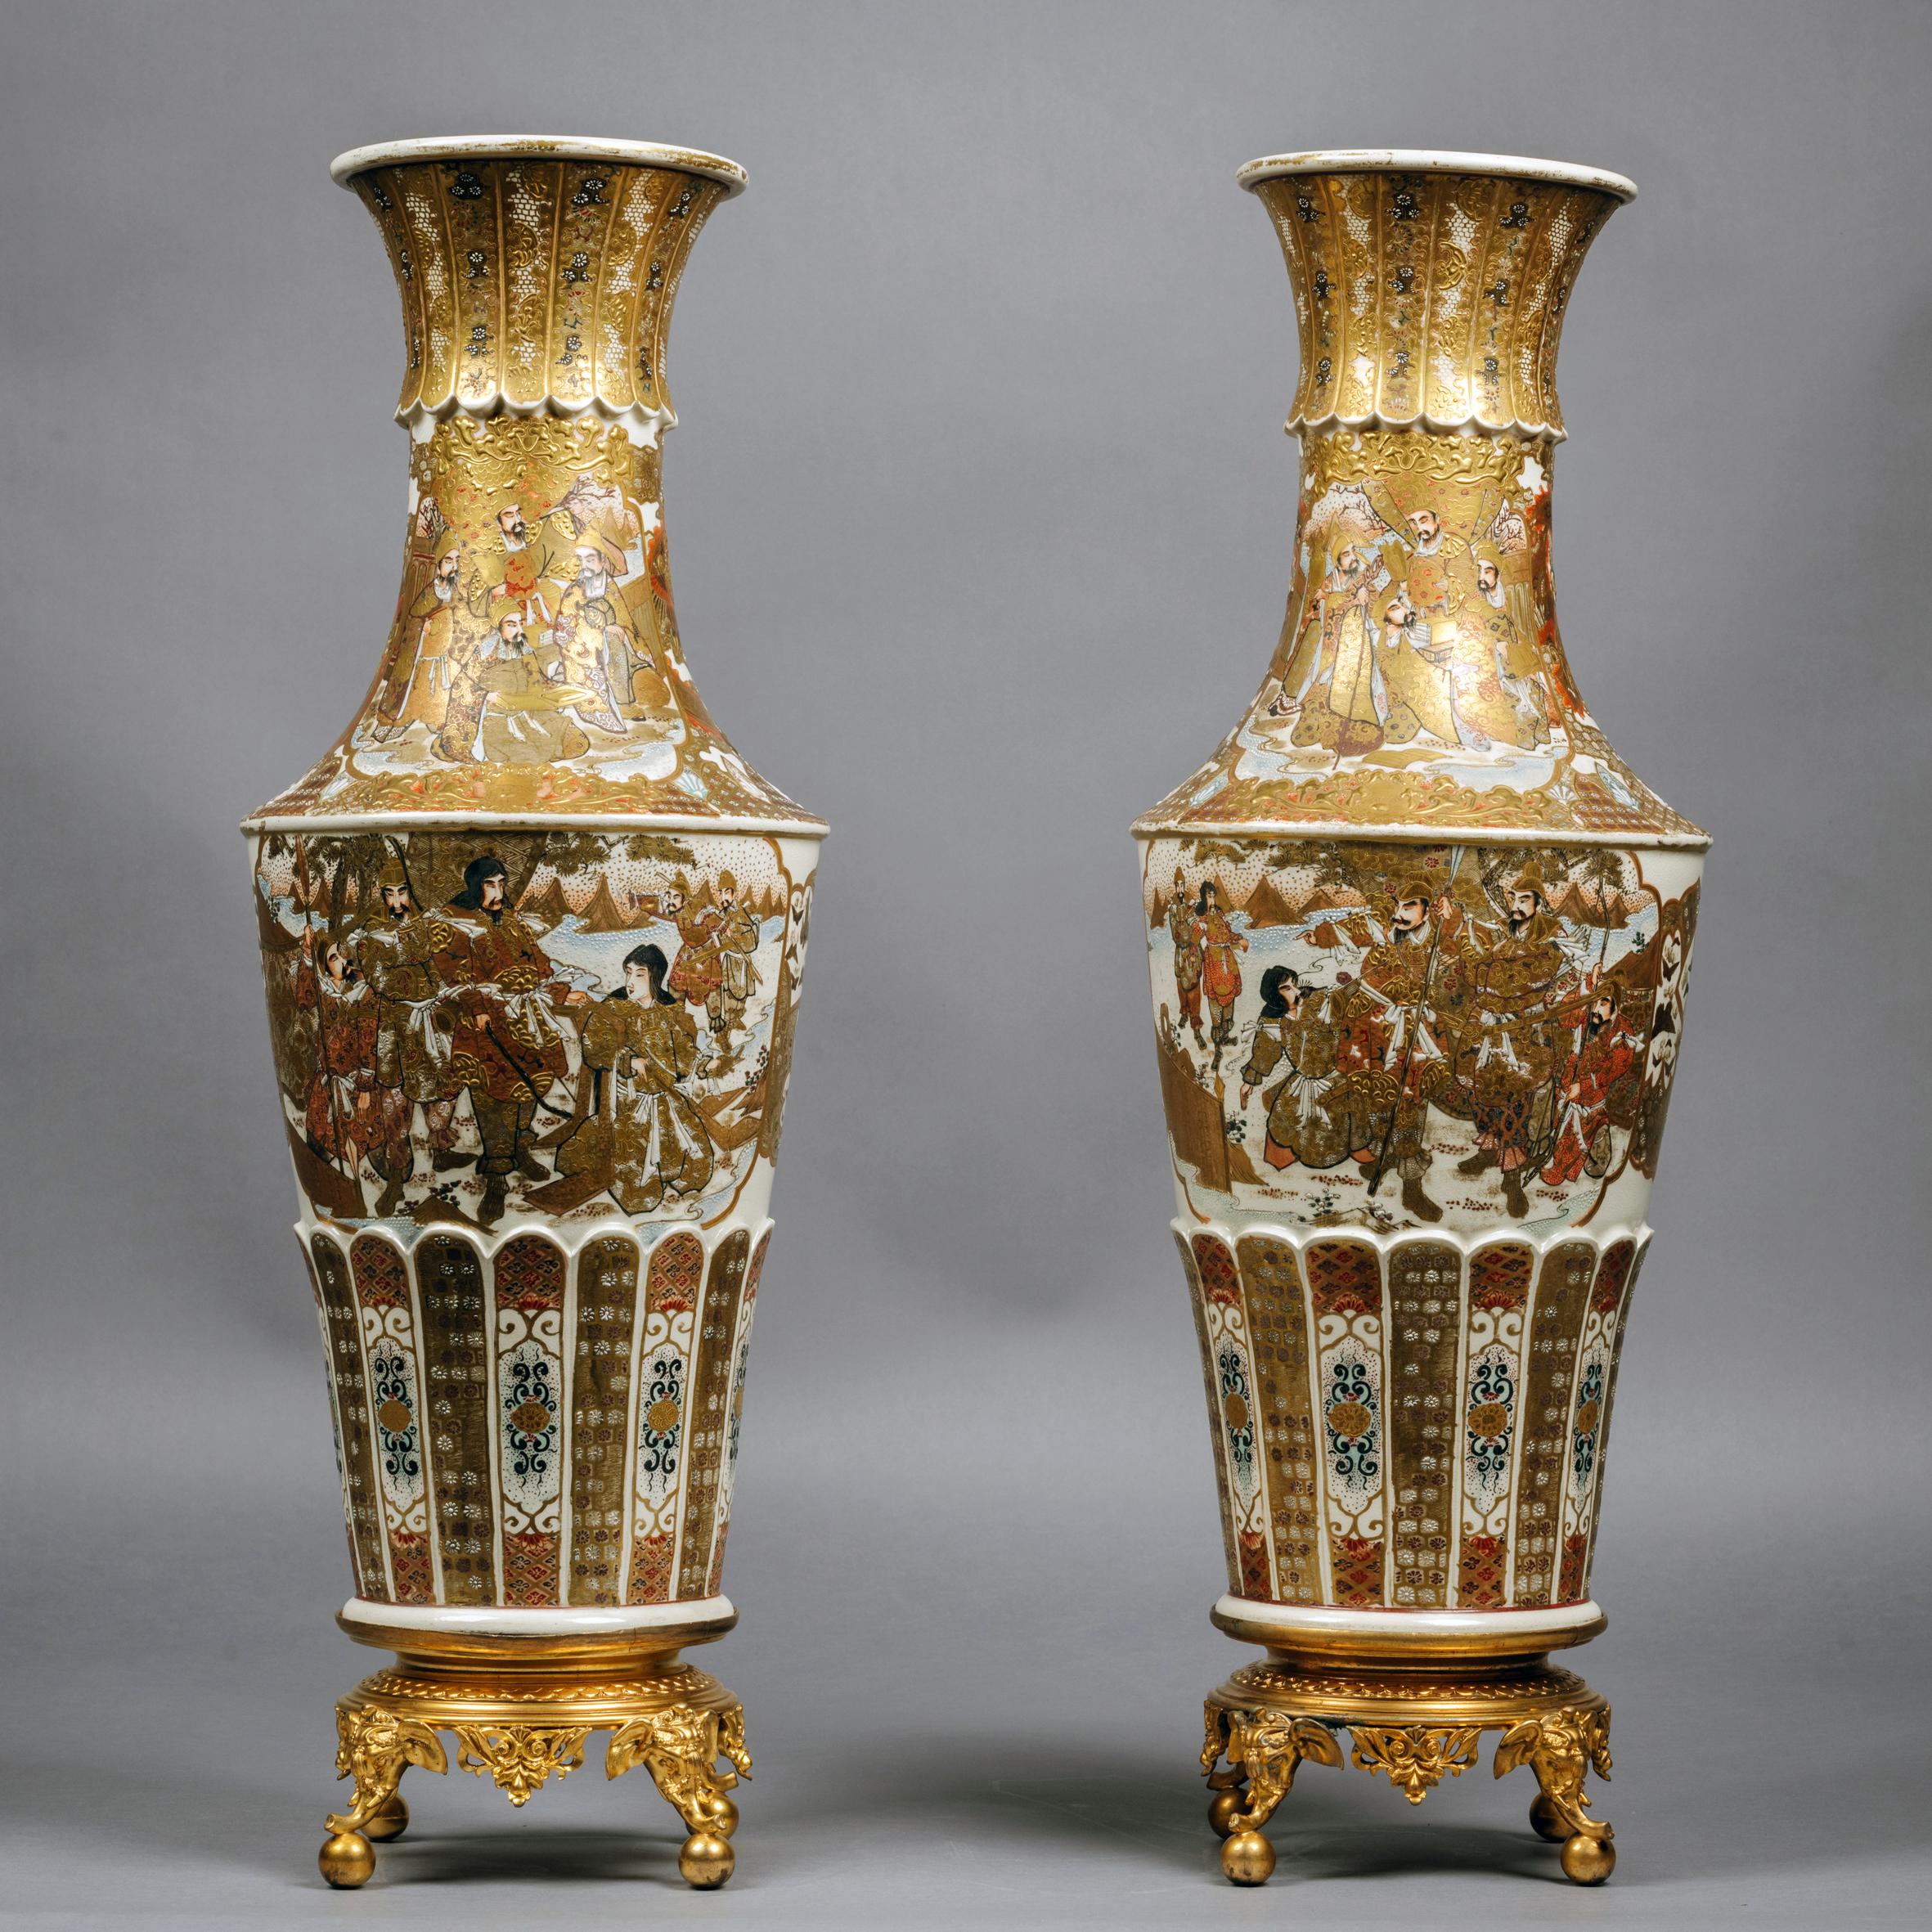 A fine pair of Japanese Satsuma vases raised on gilt-bronze bases.

Each vase with an elongated trumpet shaped neck and tapering cylindrical body, painted and gilt with panels of warriors and officers in a stylised landscape, surrounded by floral